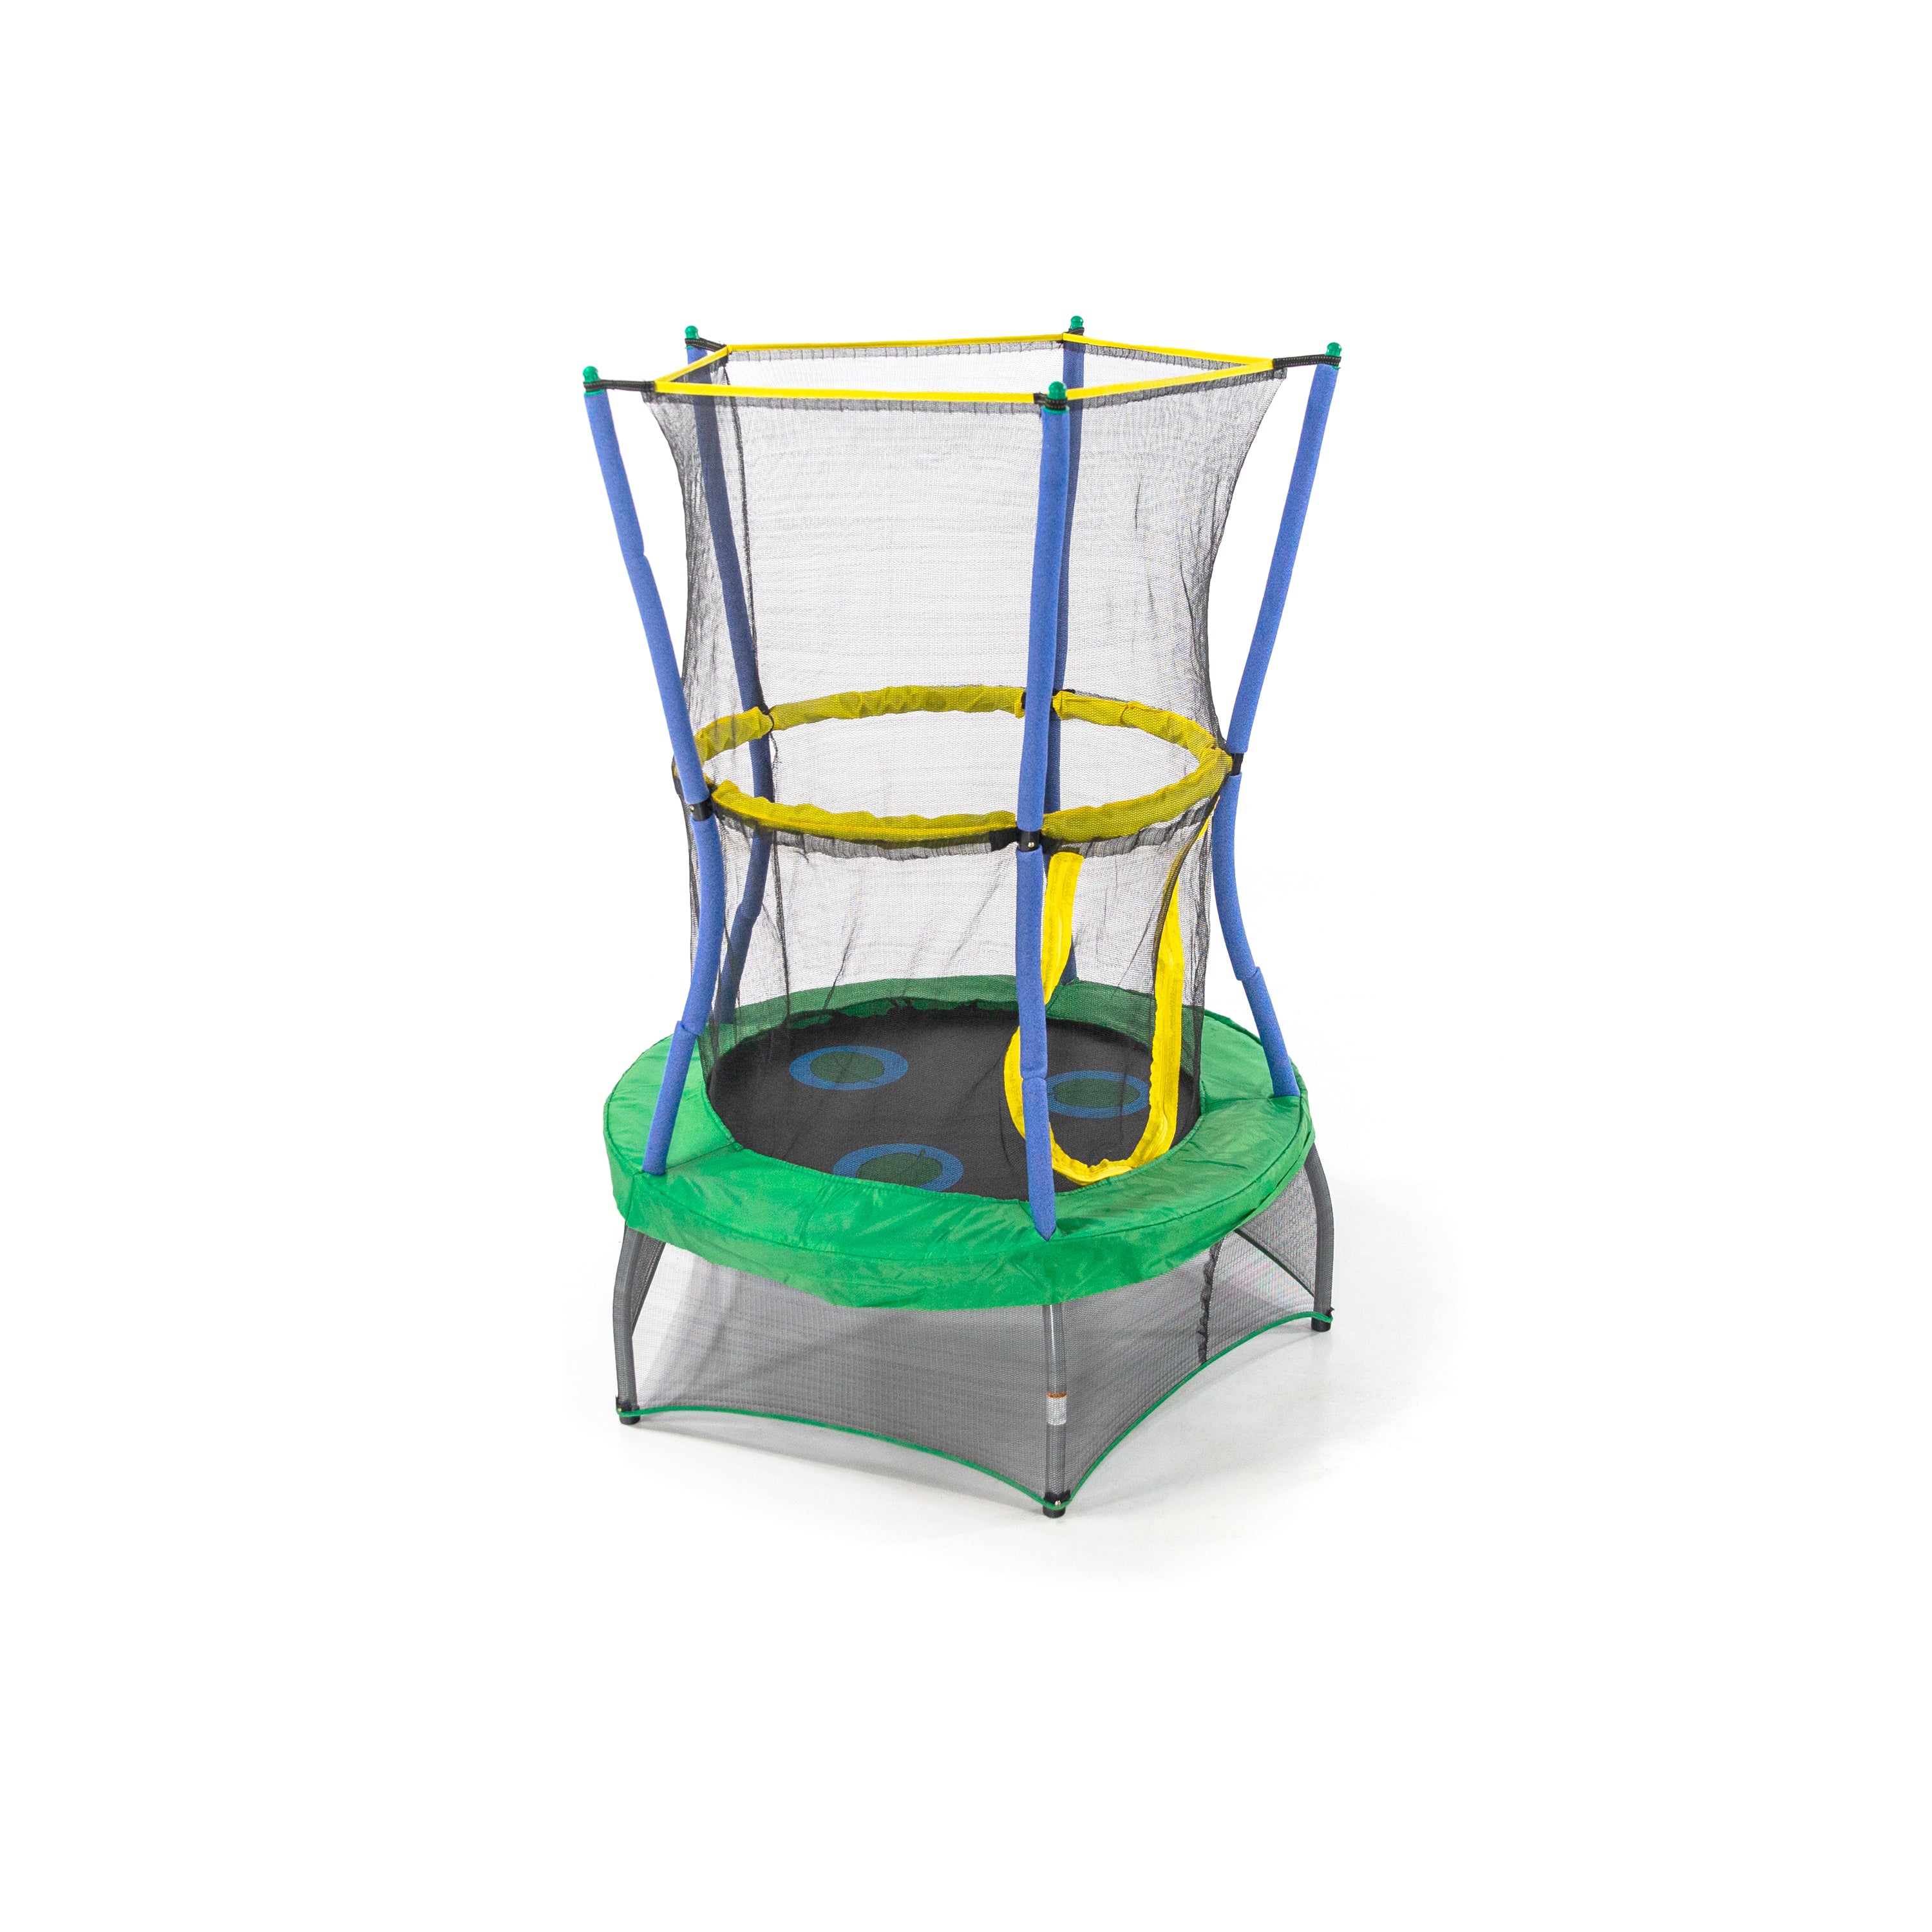 Green, blue, and yellow 40-inch mini kids trampoline with lily-pad design on jump mat.